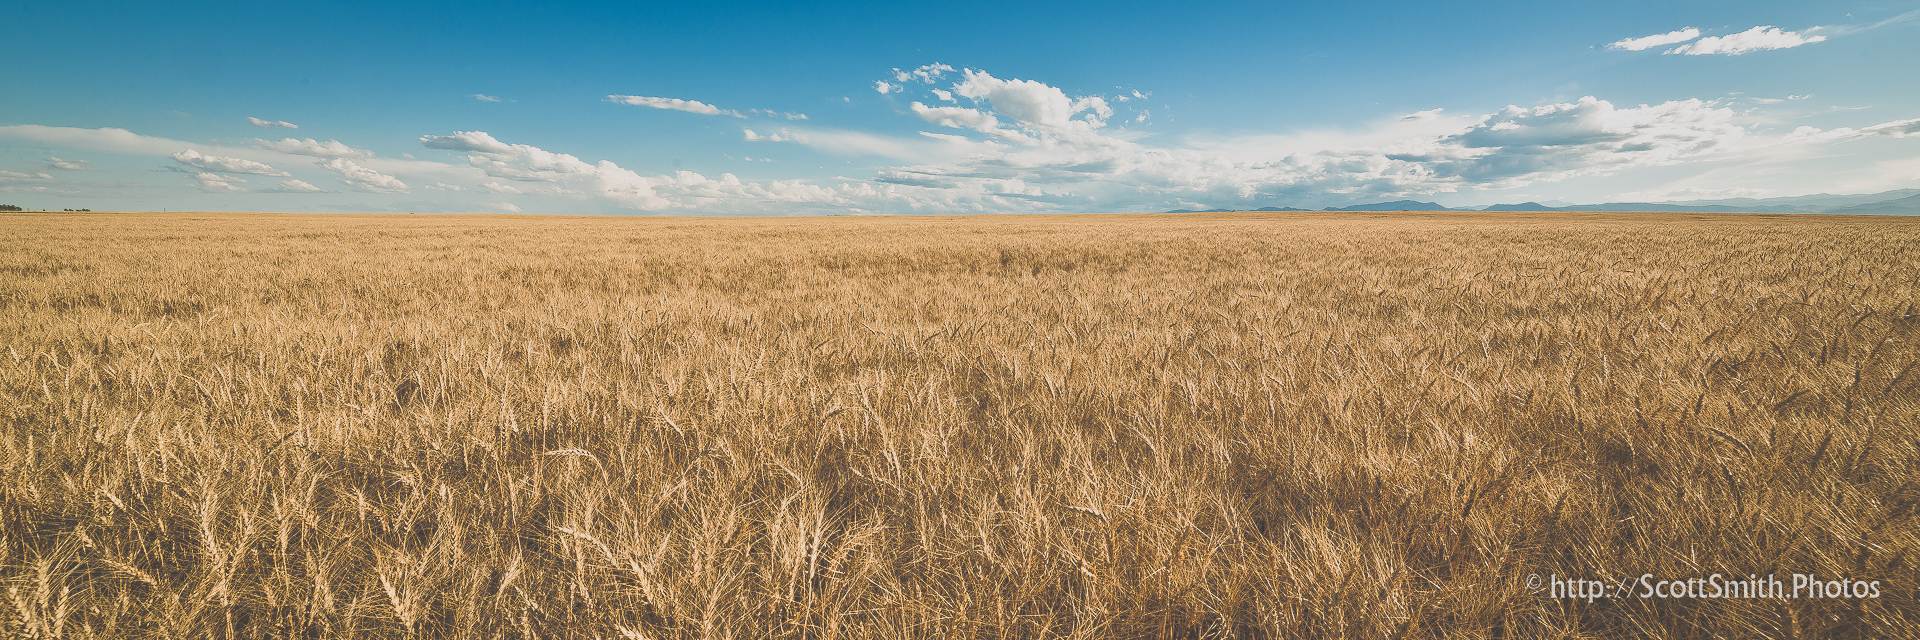 Fields of Wheat - A wheat field off of highway 52 near Longmont, Colorado in early summer. by Scott Smith Photos